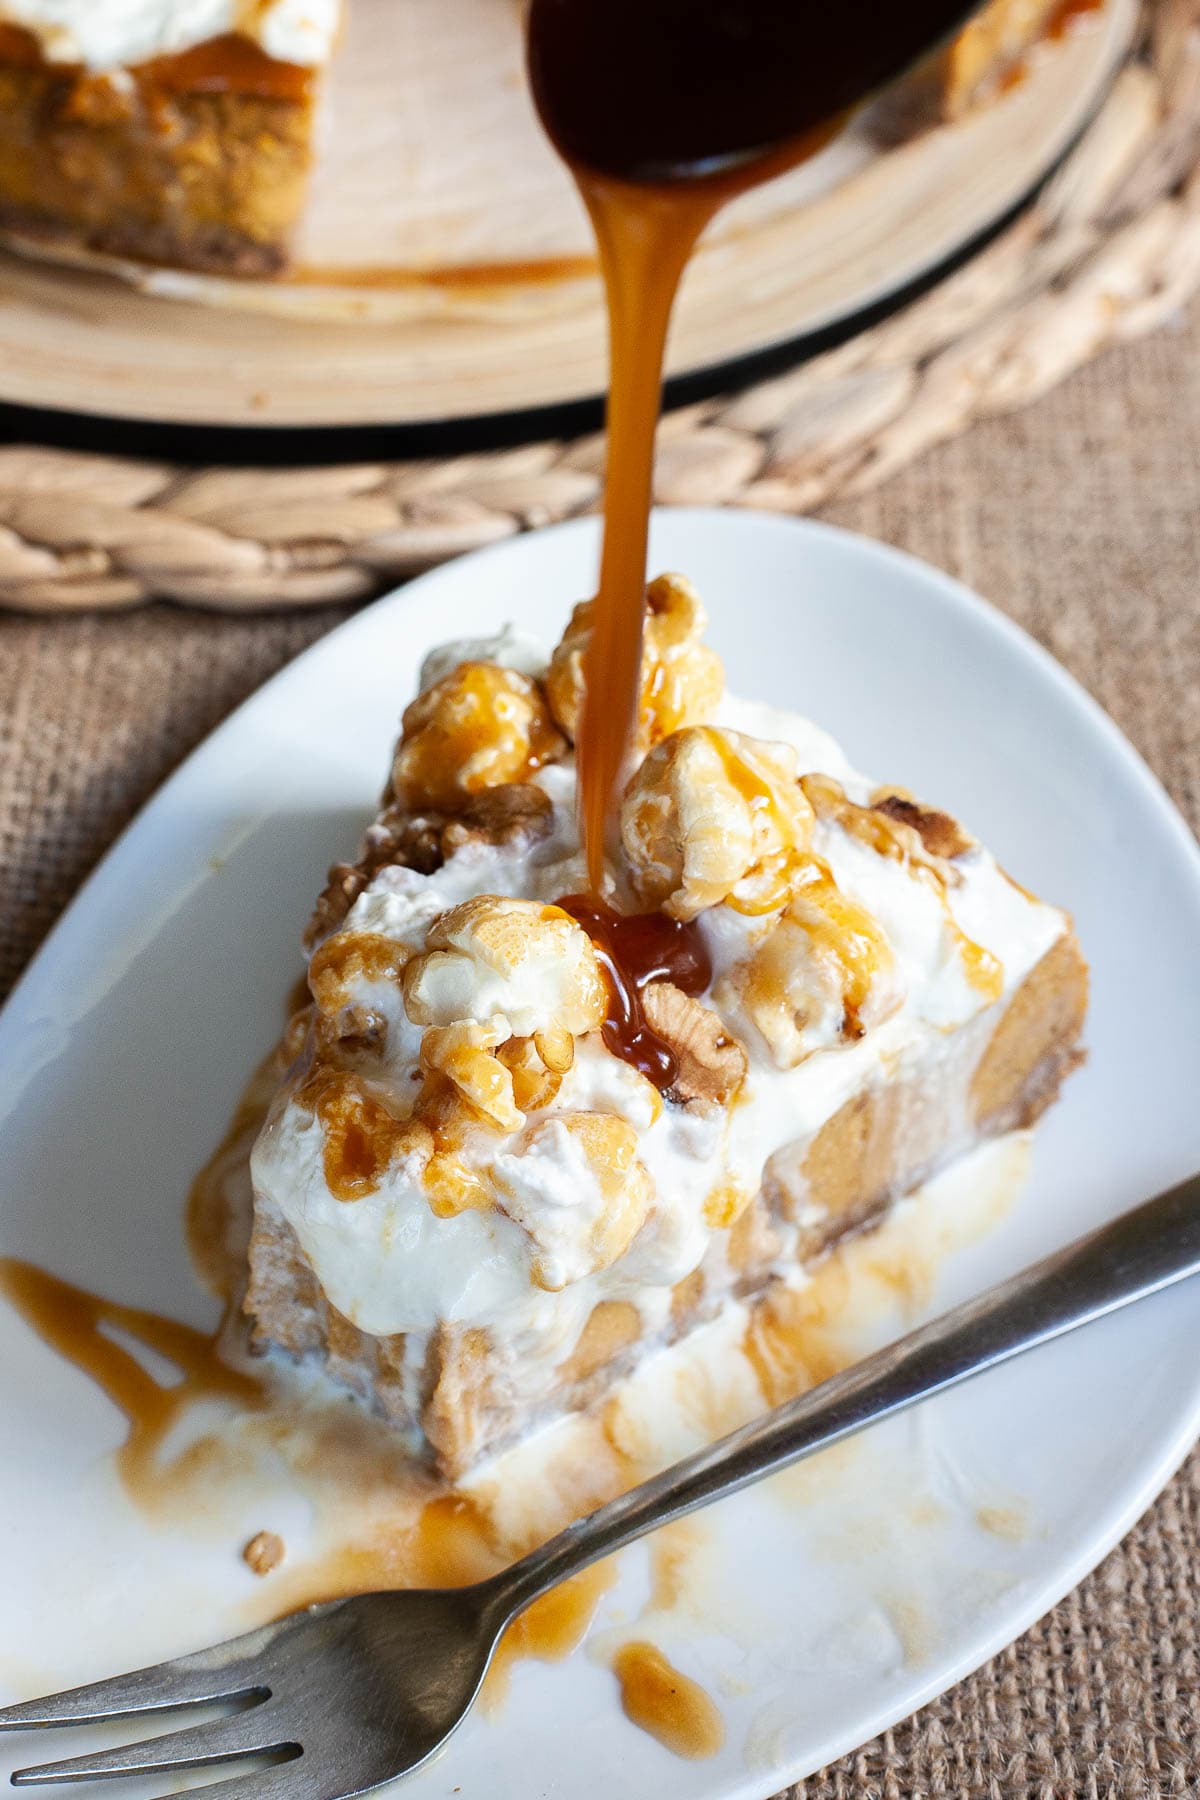 One slice of amber brown cheesecake with whipped cream, caramel sauce and chopped nuts on top is served on a white plate. More caramel sauce is flowing right on the top.